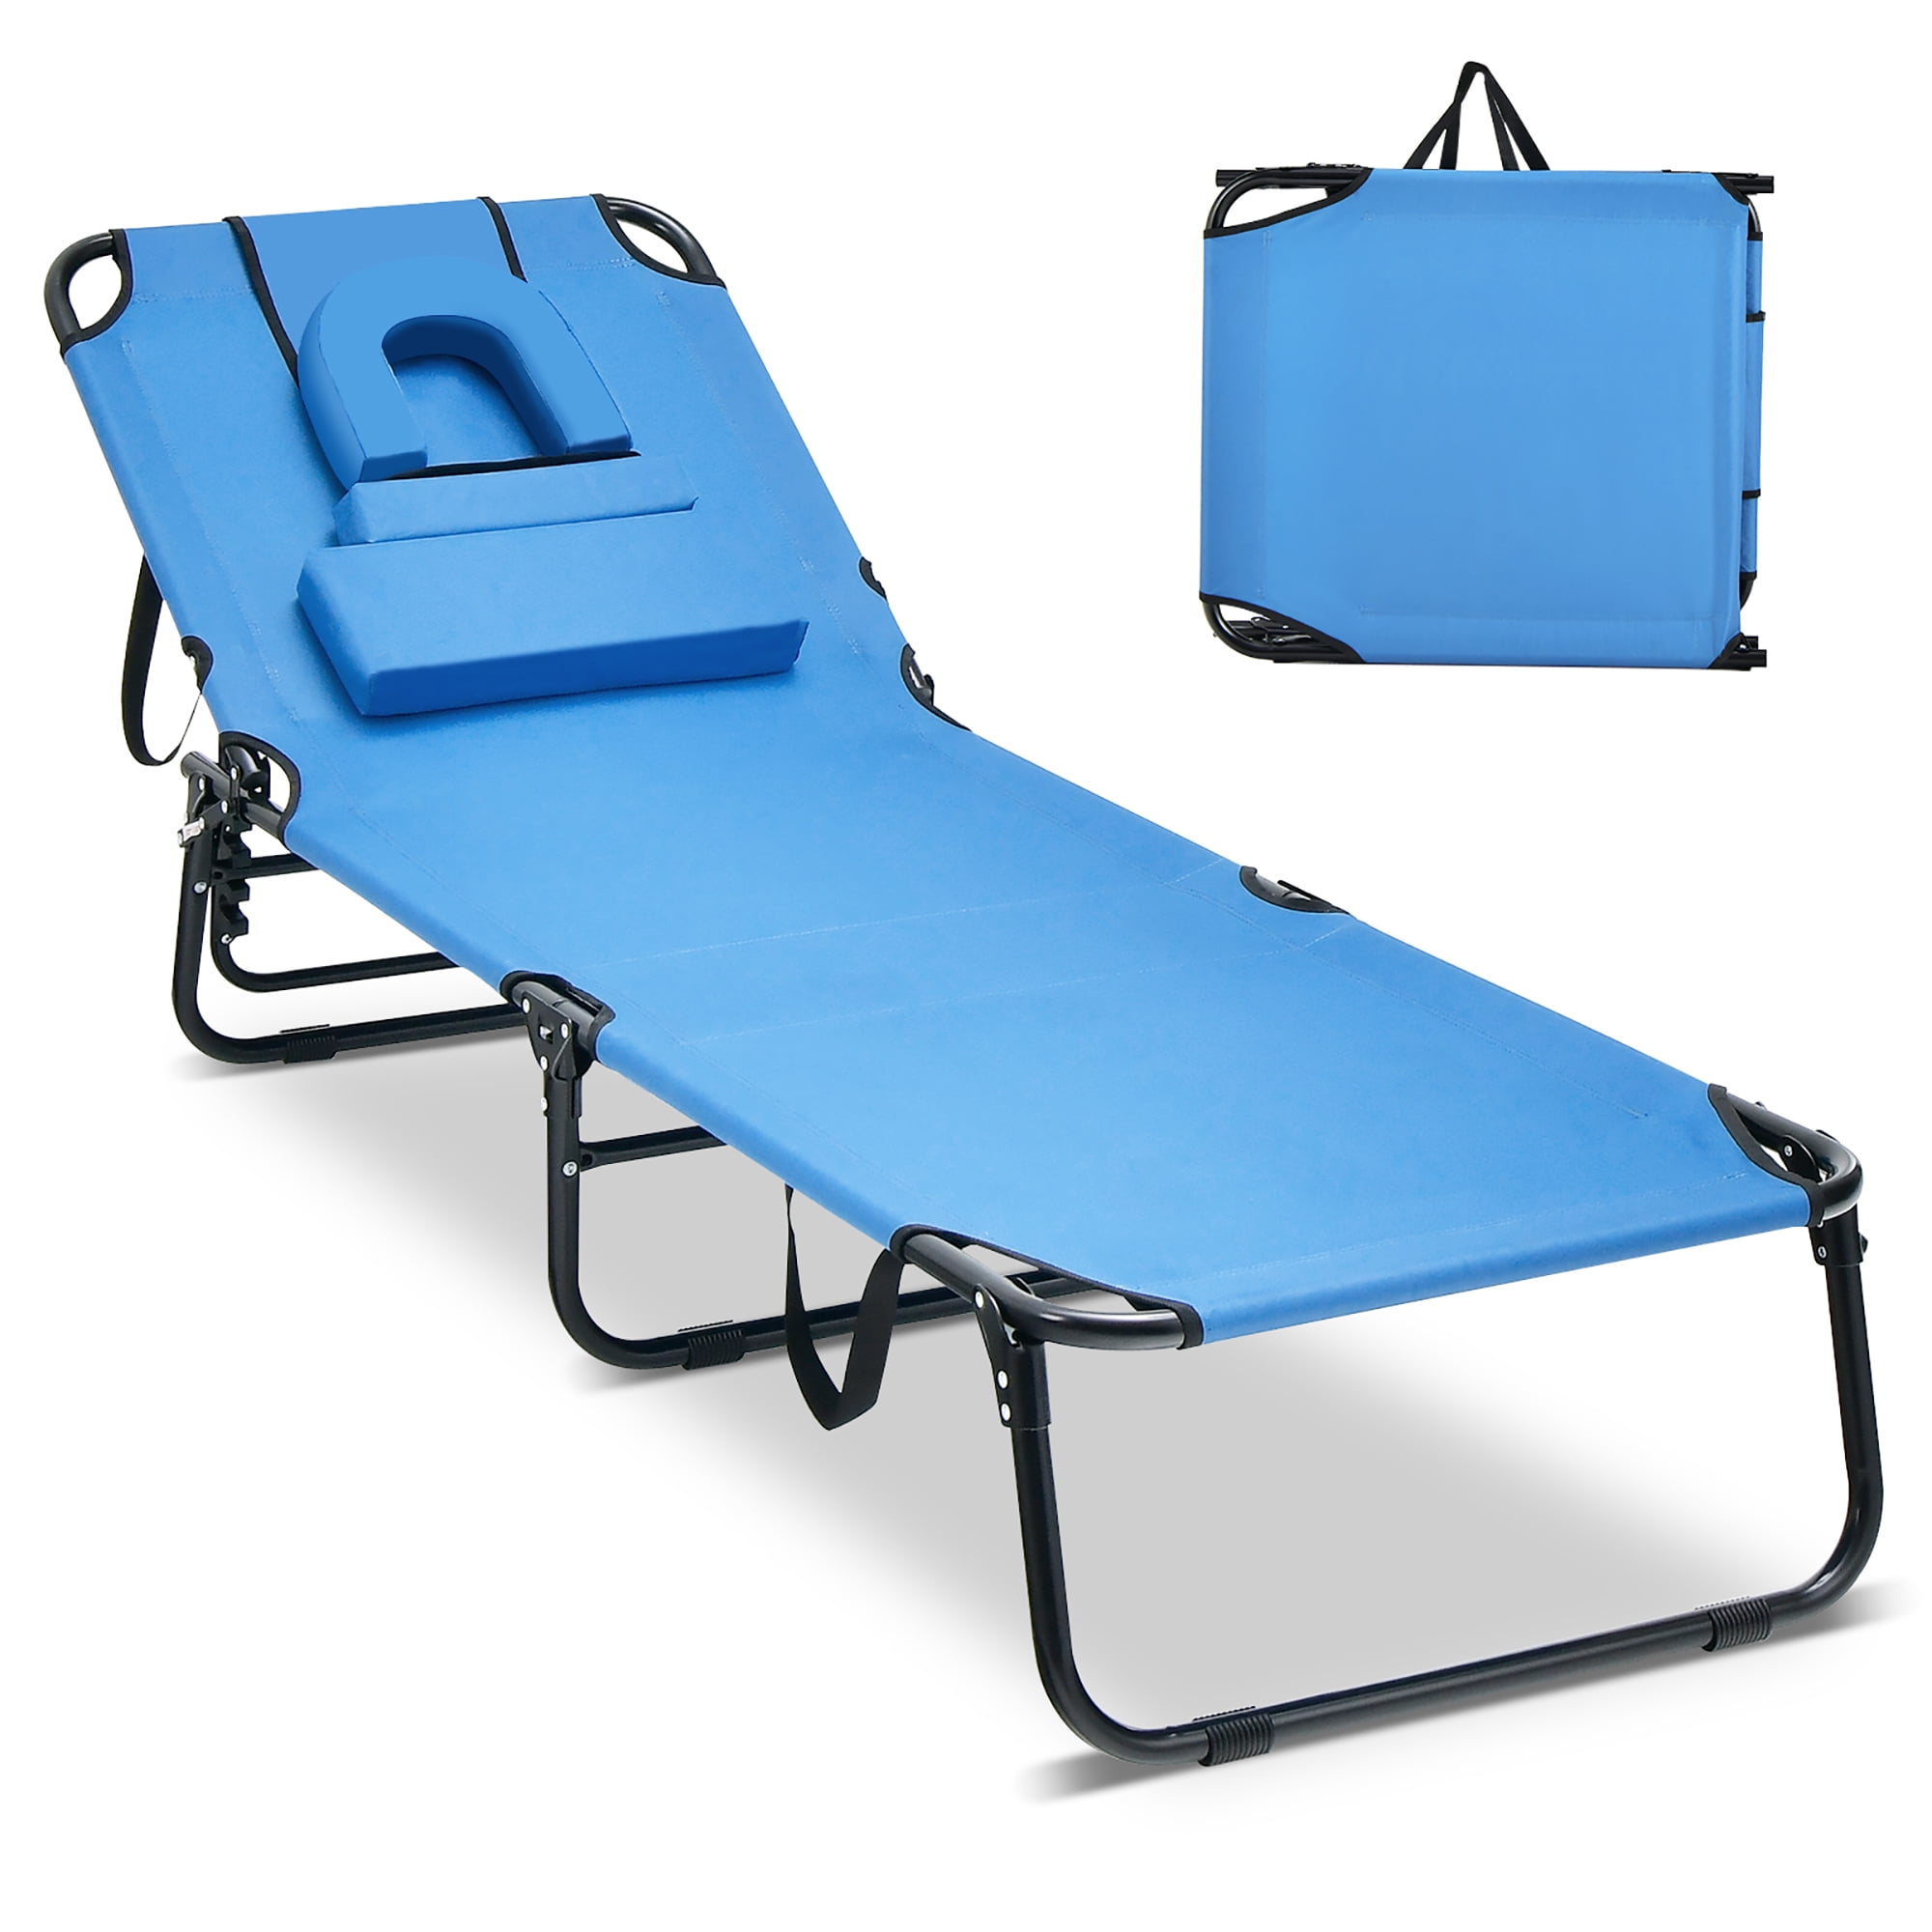 Costway Beach Chaise Lounge Chair with Face Hole Pillows & 5-Position Adjustable Backrest Blue - image 1 of 10